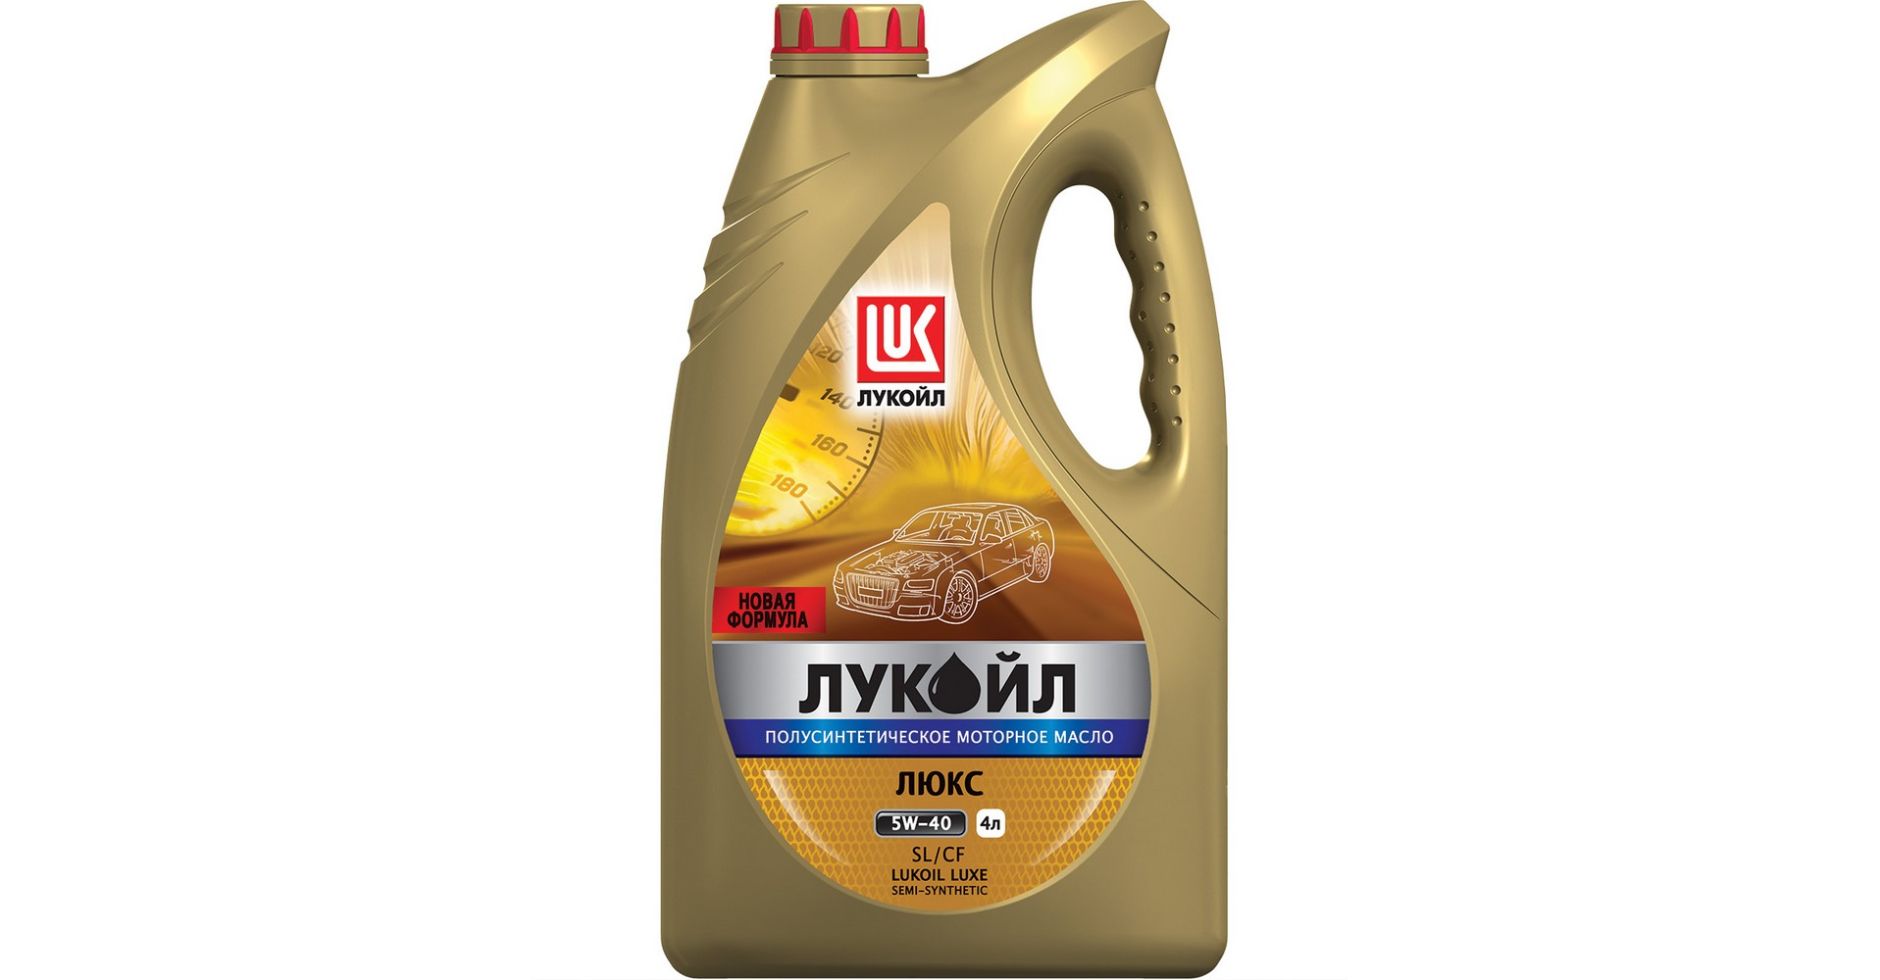 Масло лукойл 10w 40 cf. Lukoil Luxe 10w-40 5l. Лукойл Люкс 5w30 полусинтетика. Лукойл Люкс 10w 40 синтетика. Масло моторное 5w40 Лукойл Люкс.